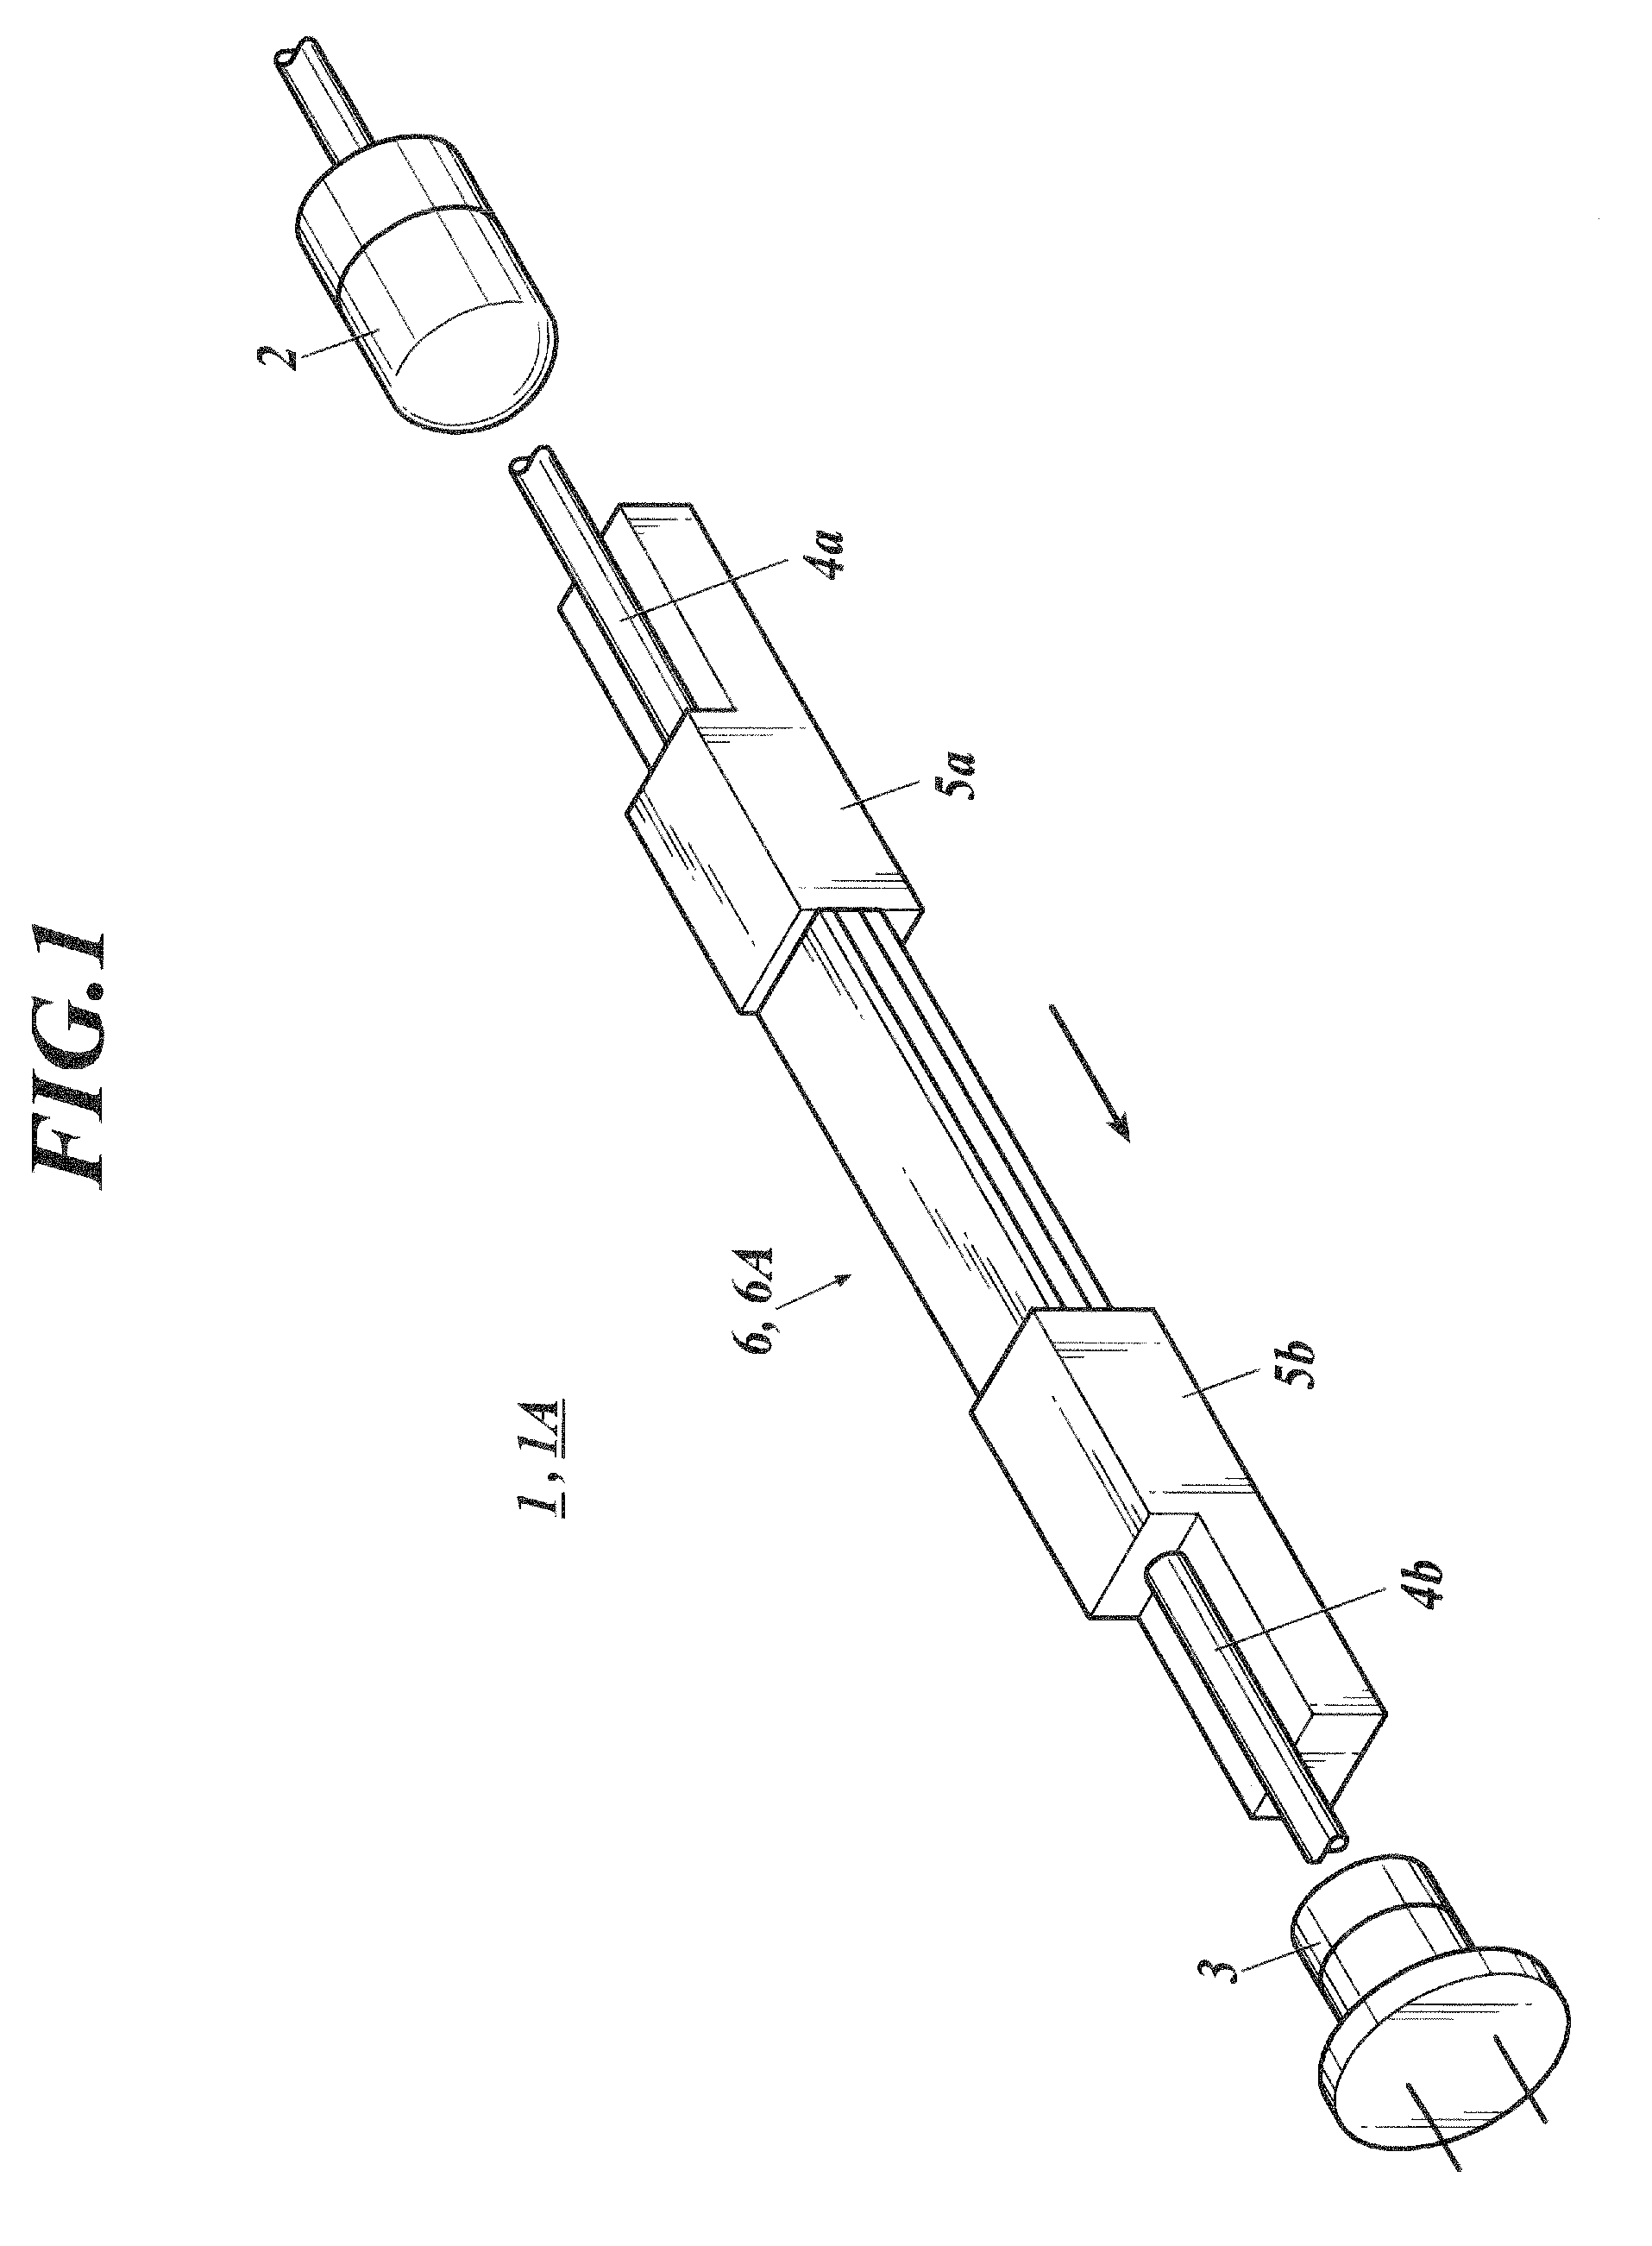 Gas detection apparatus using optical waveguide